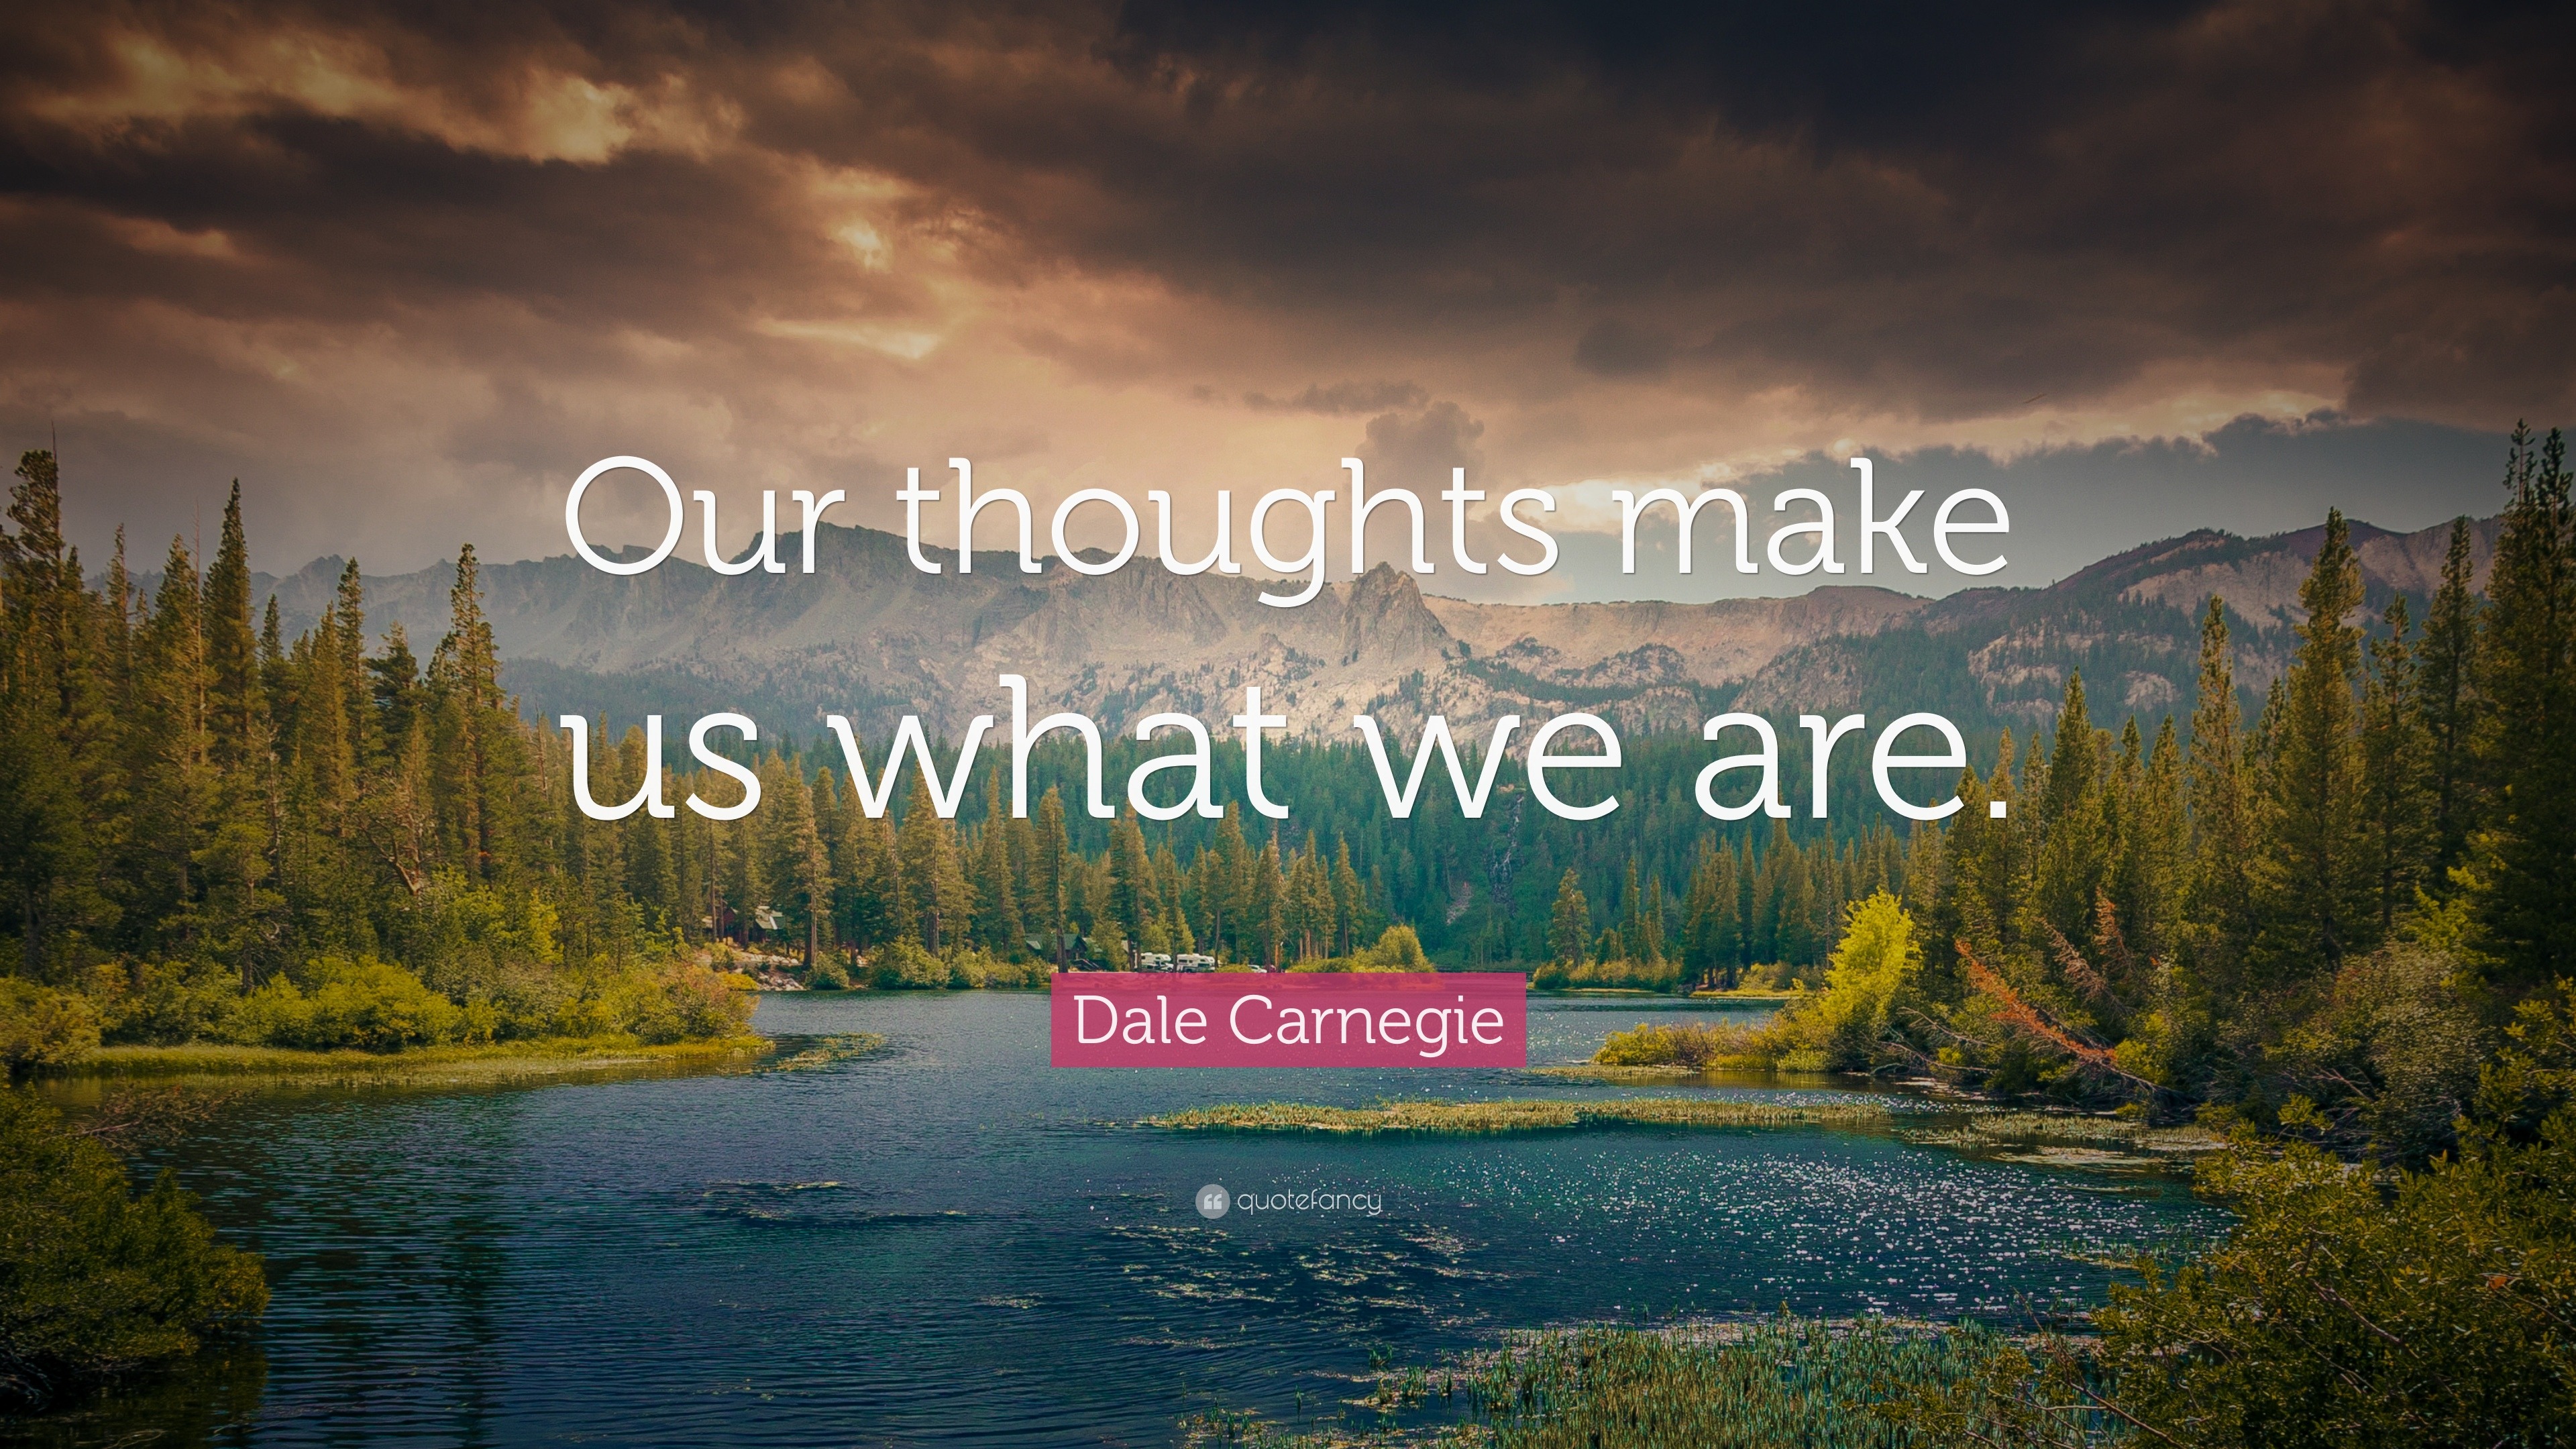 https://quotefancy.com/media/wallpaper/3840x2160/17576-Dale-Carnegie-Quote-Our-thoughts-make-us-what-we-are.jpg